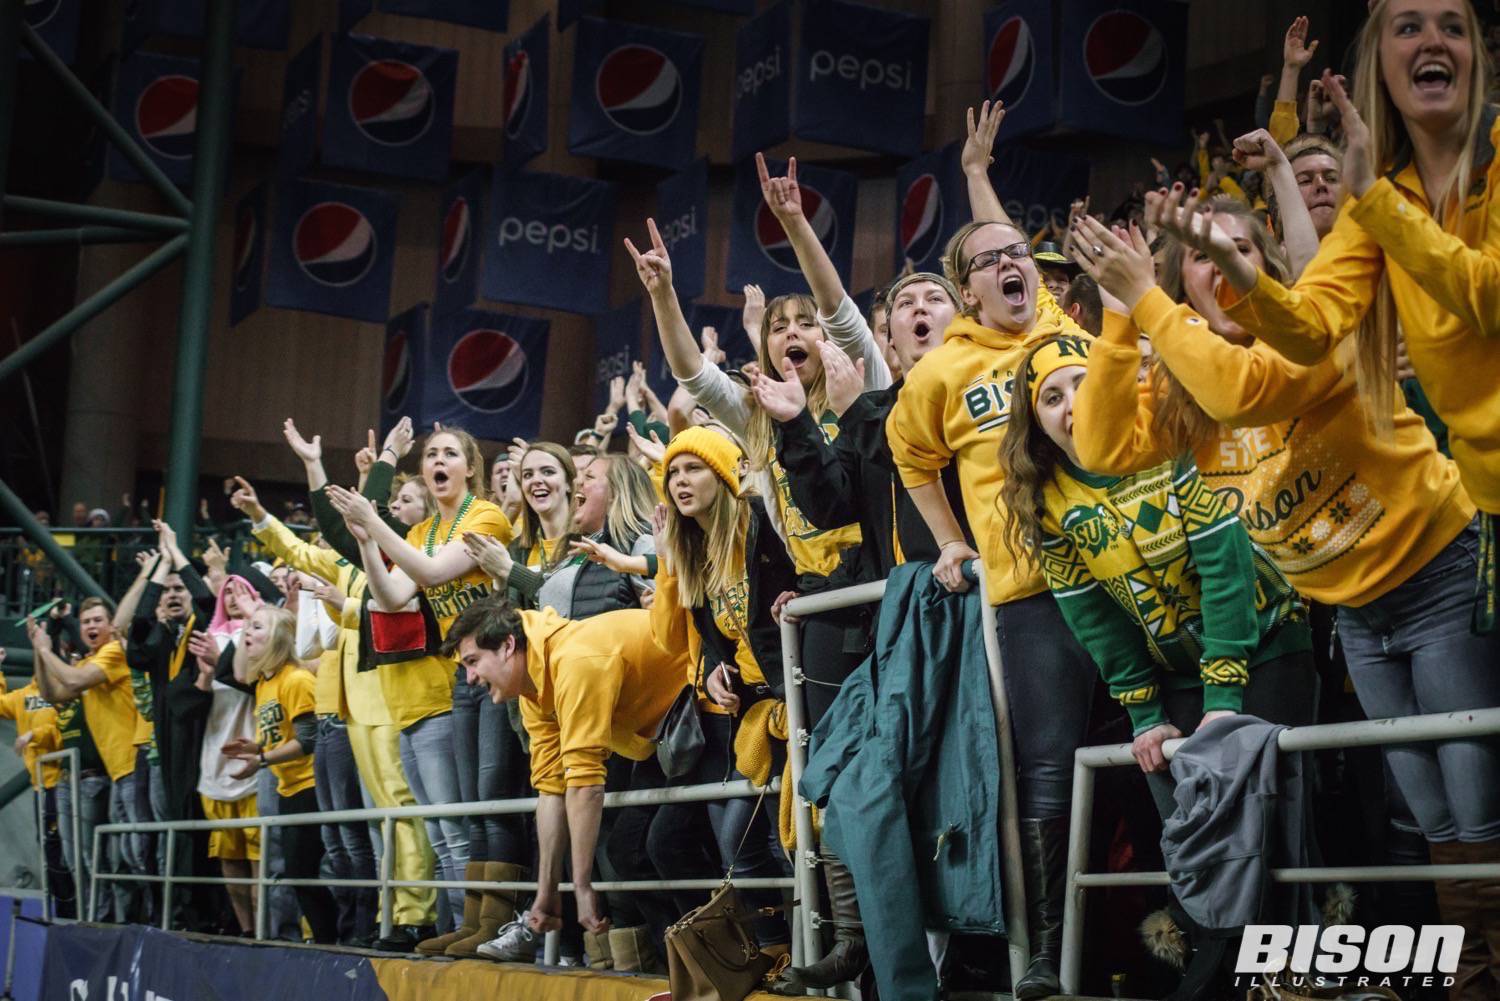 Slaubaugh's Scoop this month is about Christmas for Bison fans